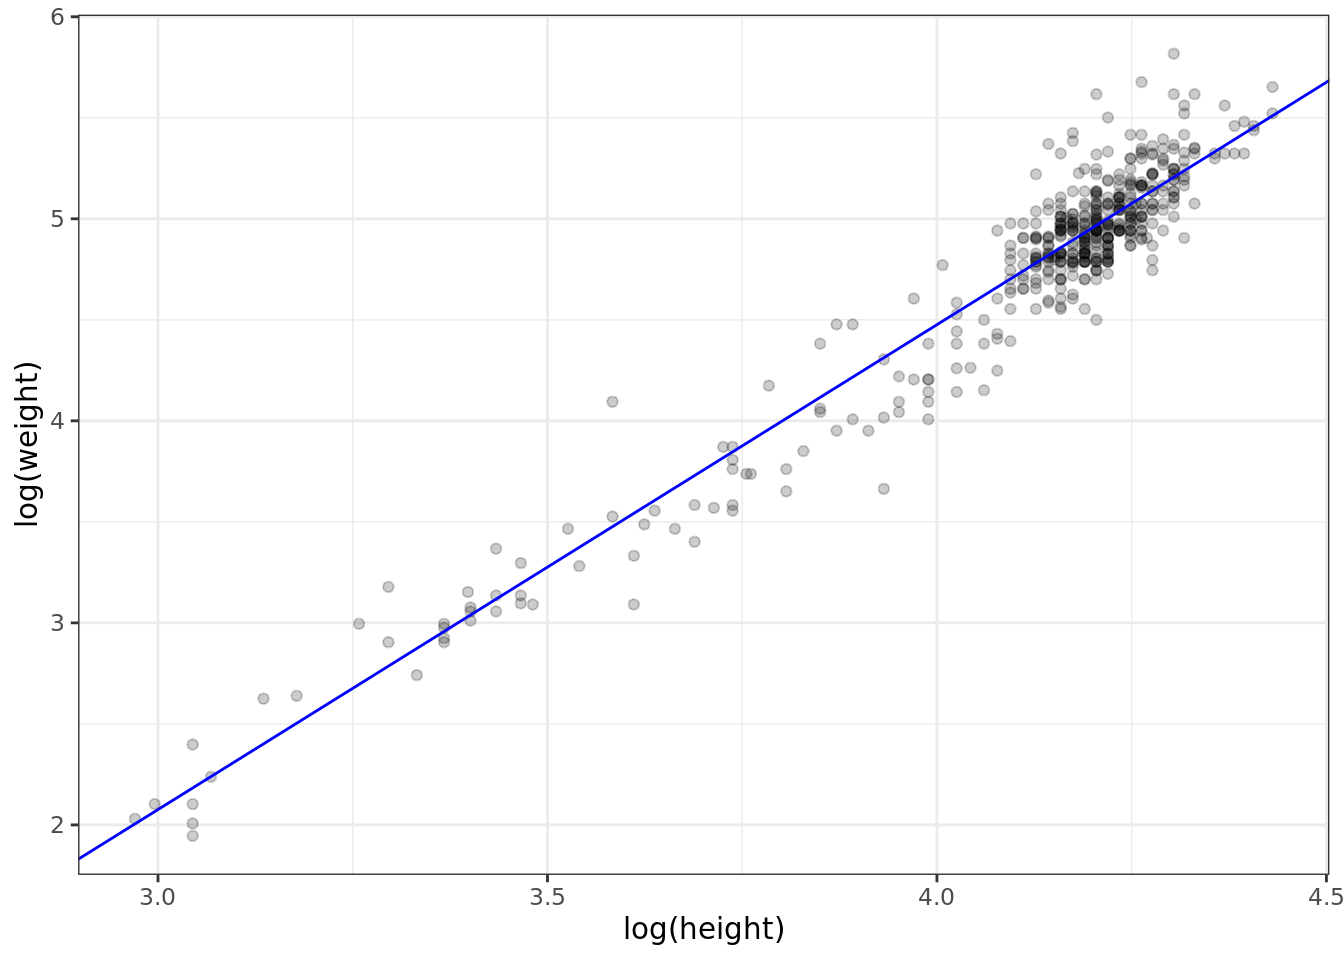 Log transformed values with superimposed regression line.